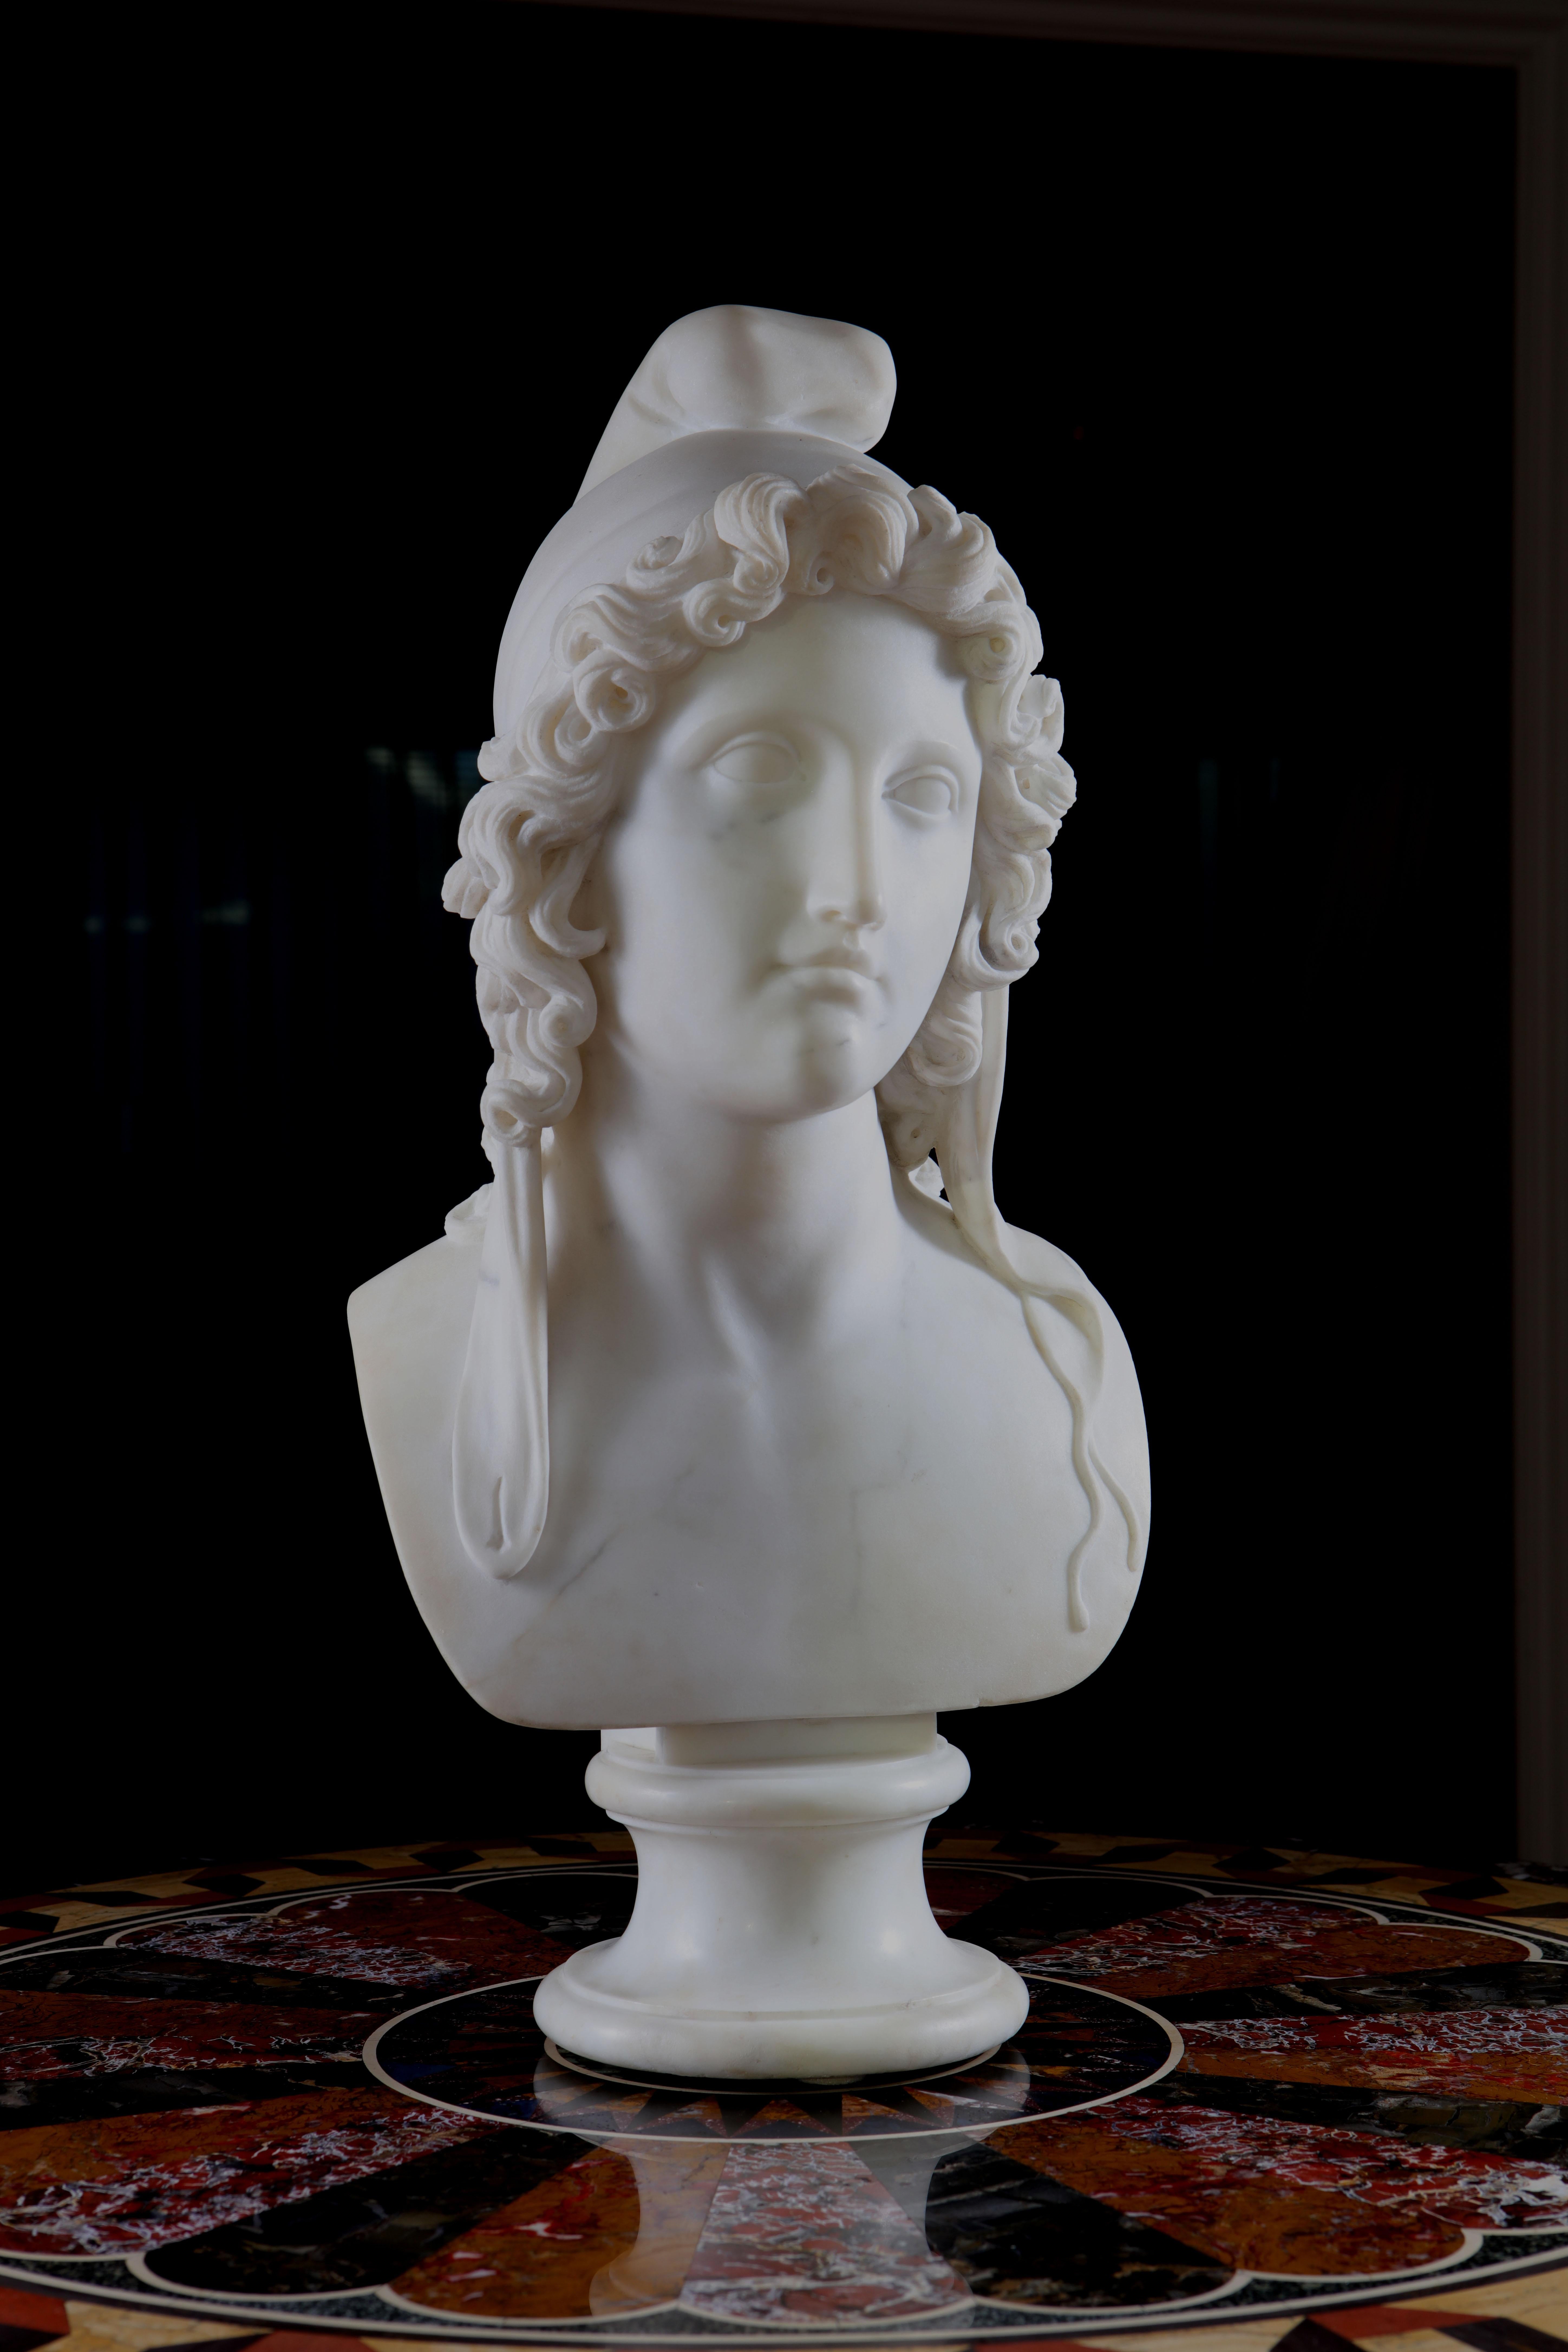 Carrara marble classical bust of Paris wearing a Phrygian cap after Antonio Canova 1757–1822

One of the great Neoclassical sculptor Canova's most famous compositions represents Paris judging which of the three goddesses, Juno, Minerva, or Venus,